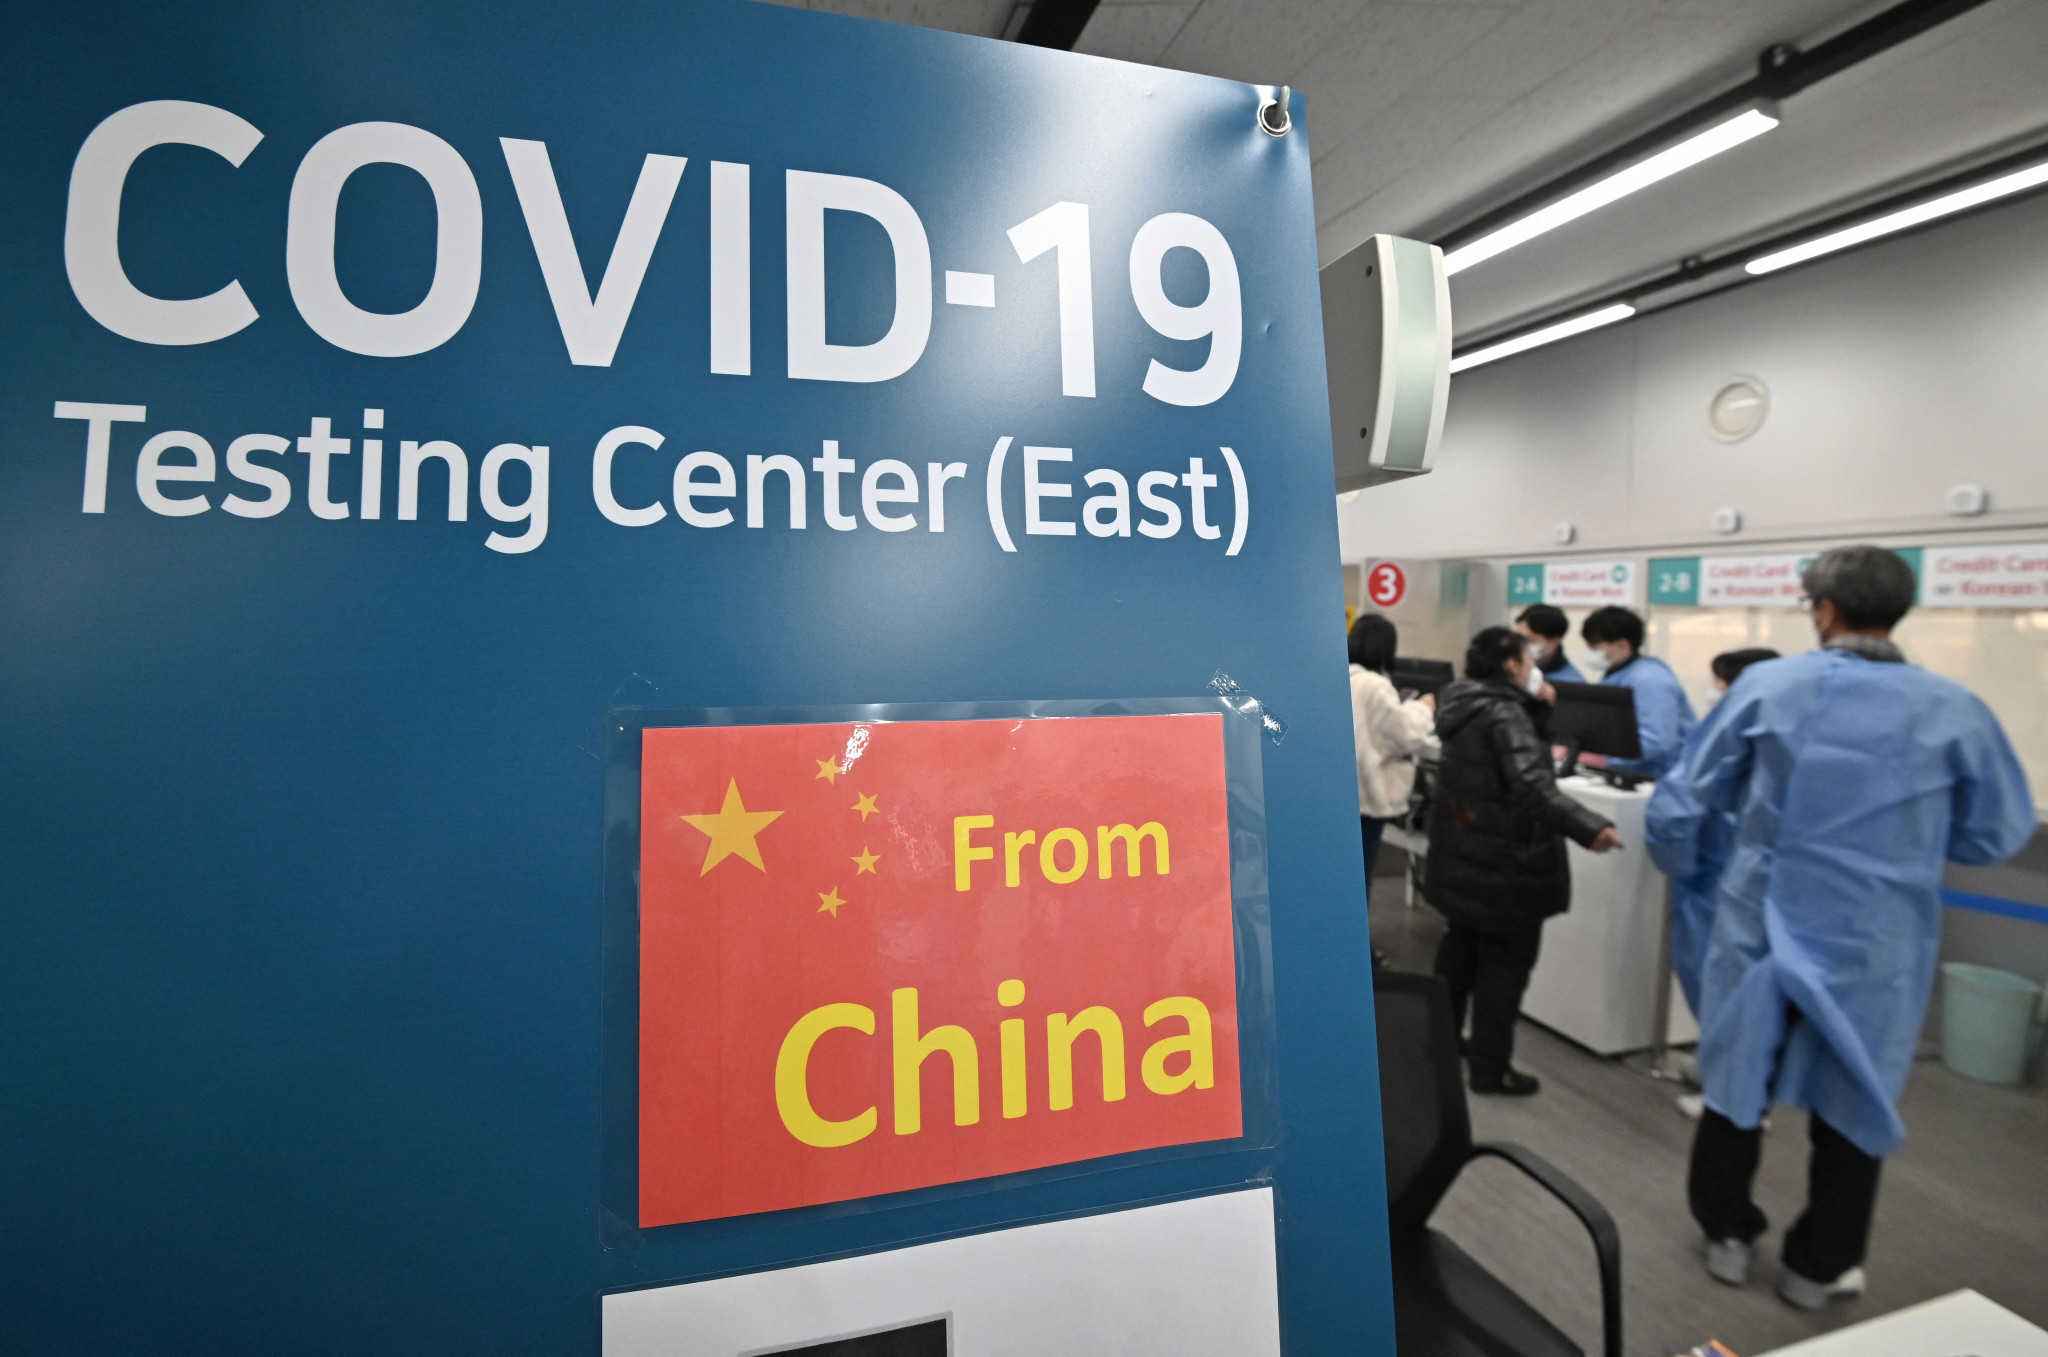 Chinese visitors are to be subjected to stricter testing in other countries after an increase in the number of COVID-19 cases ©Getty Images